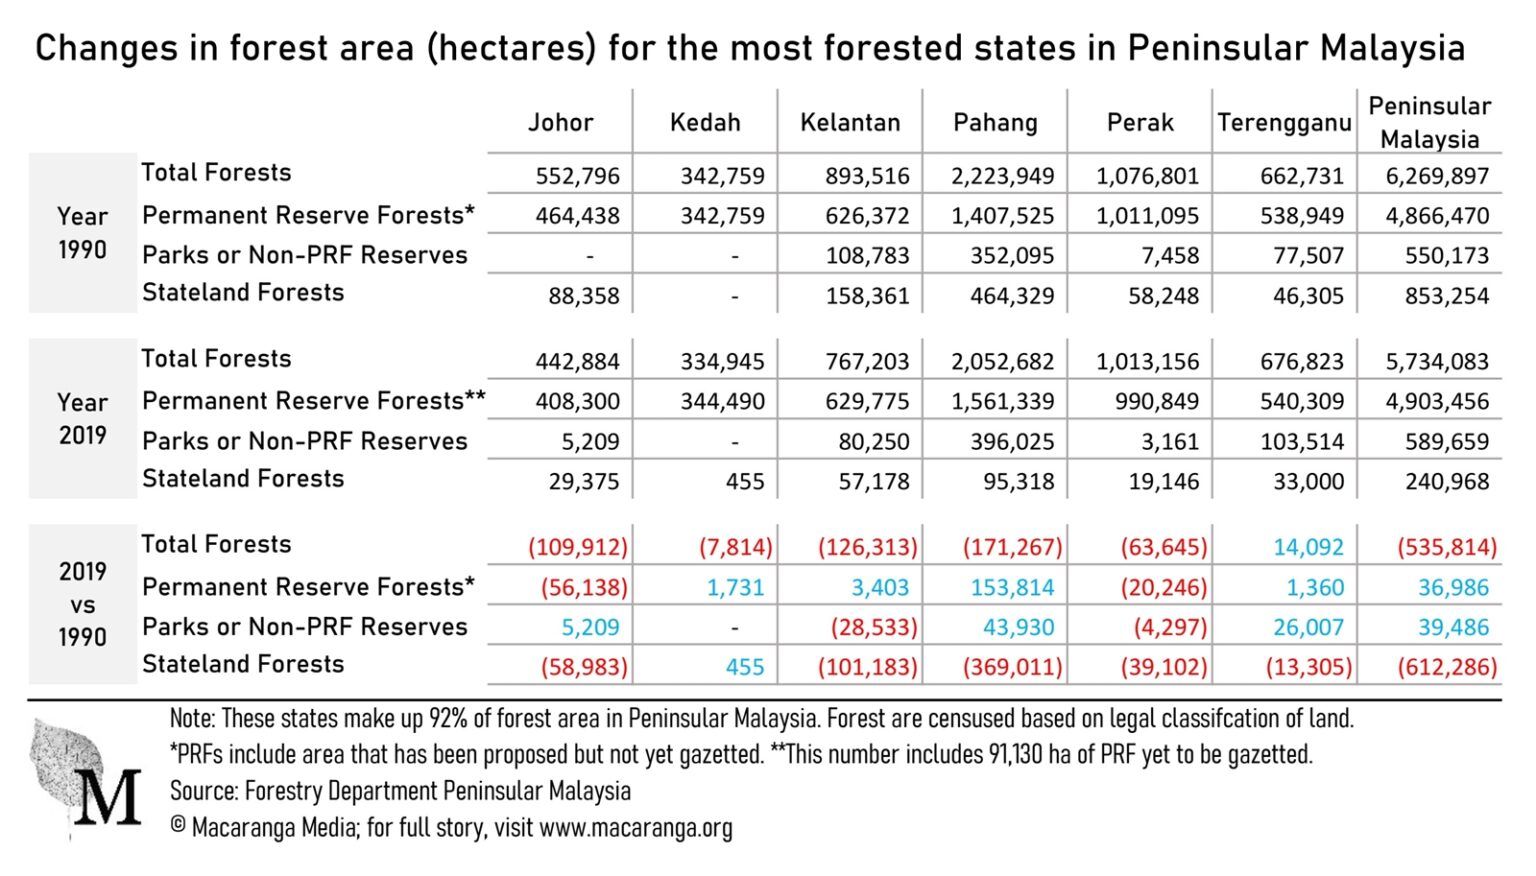 Table 1: States have often expanded and excised permanent reserve forests.